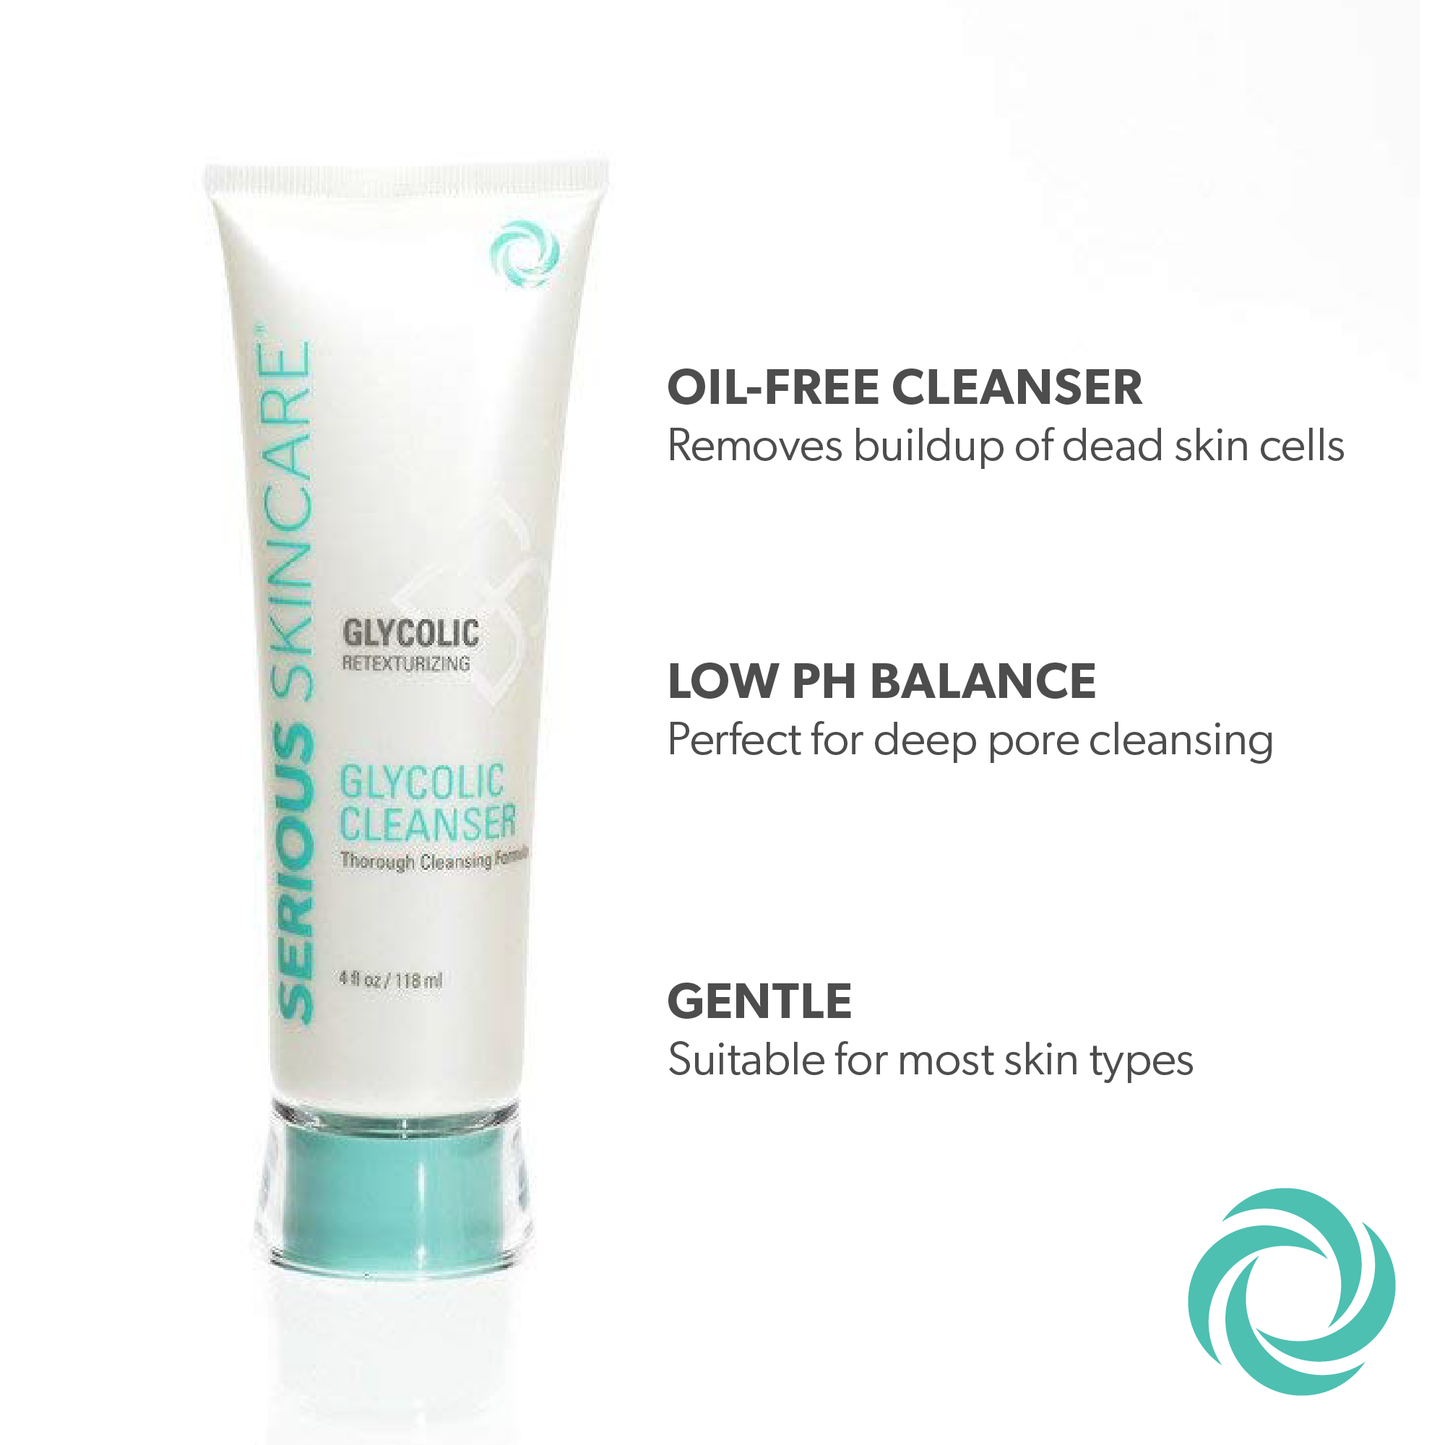 Oil-free glycolic acid retexturizing cleanser by Serious Skincare